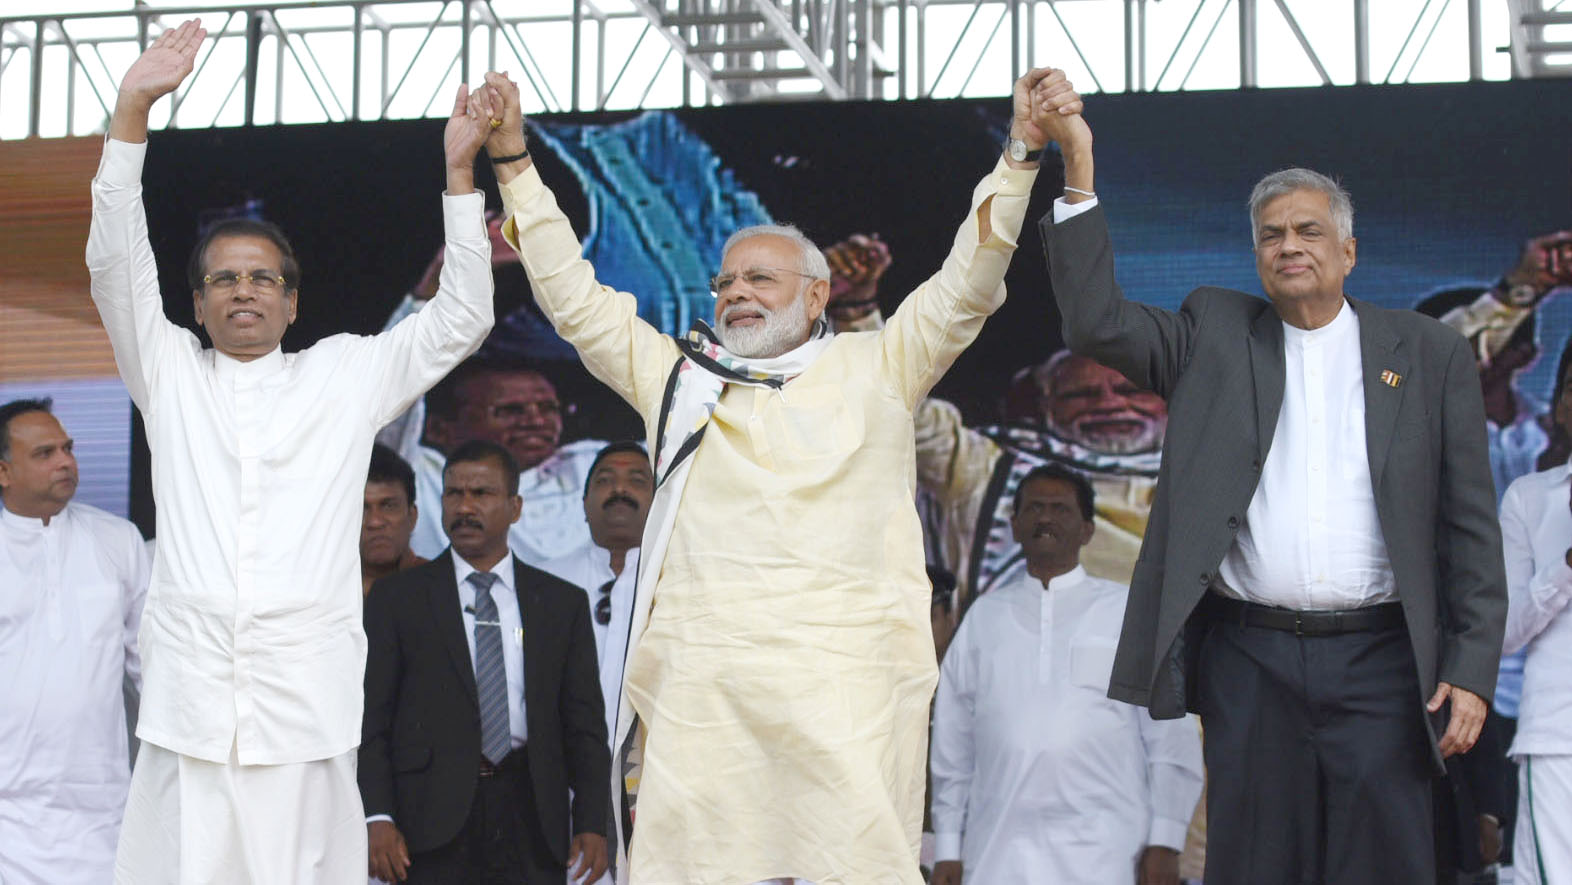 The Prime Minister, Shri Narendra Modi at the Indian Origin Tamil Community function, at Norwood Grounds, Dickoya, in Sri Lanka on May 12, 2017. The President of the Democratic Socialist Republic of Sri Lanka, Mr. Maithripala Sirisena and the Prime Minister of the Democratic Socialist Republic of Sri Lanka, Mr. Ranil Wickremesinghe are also seen.